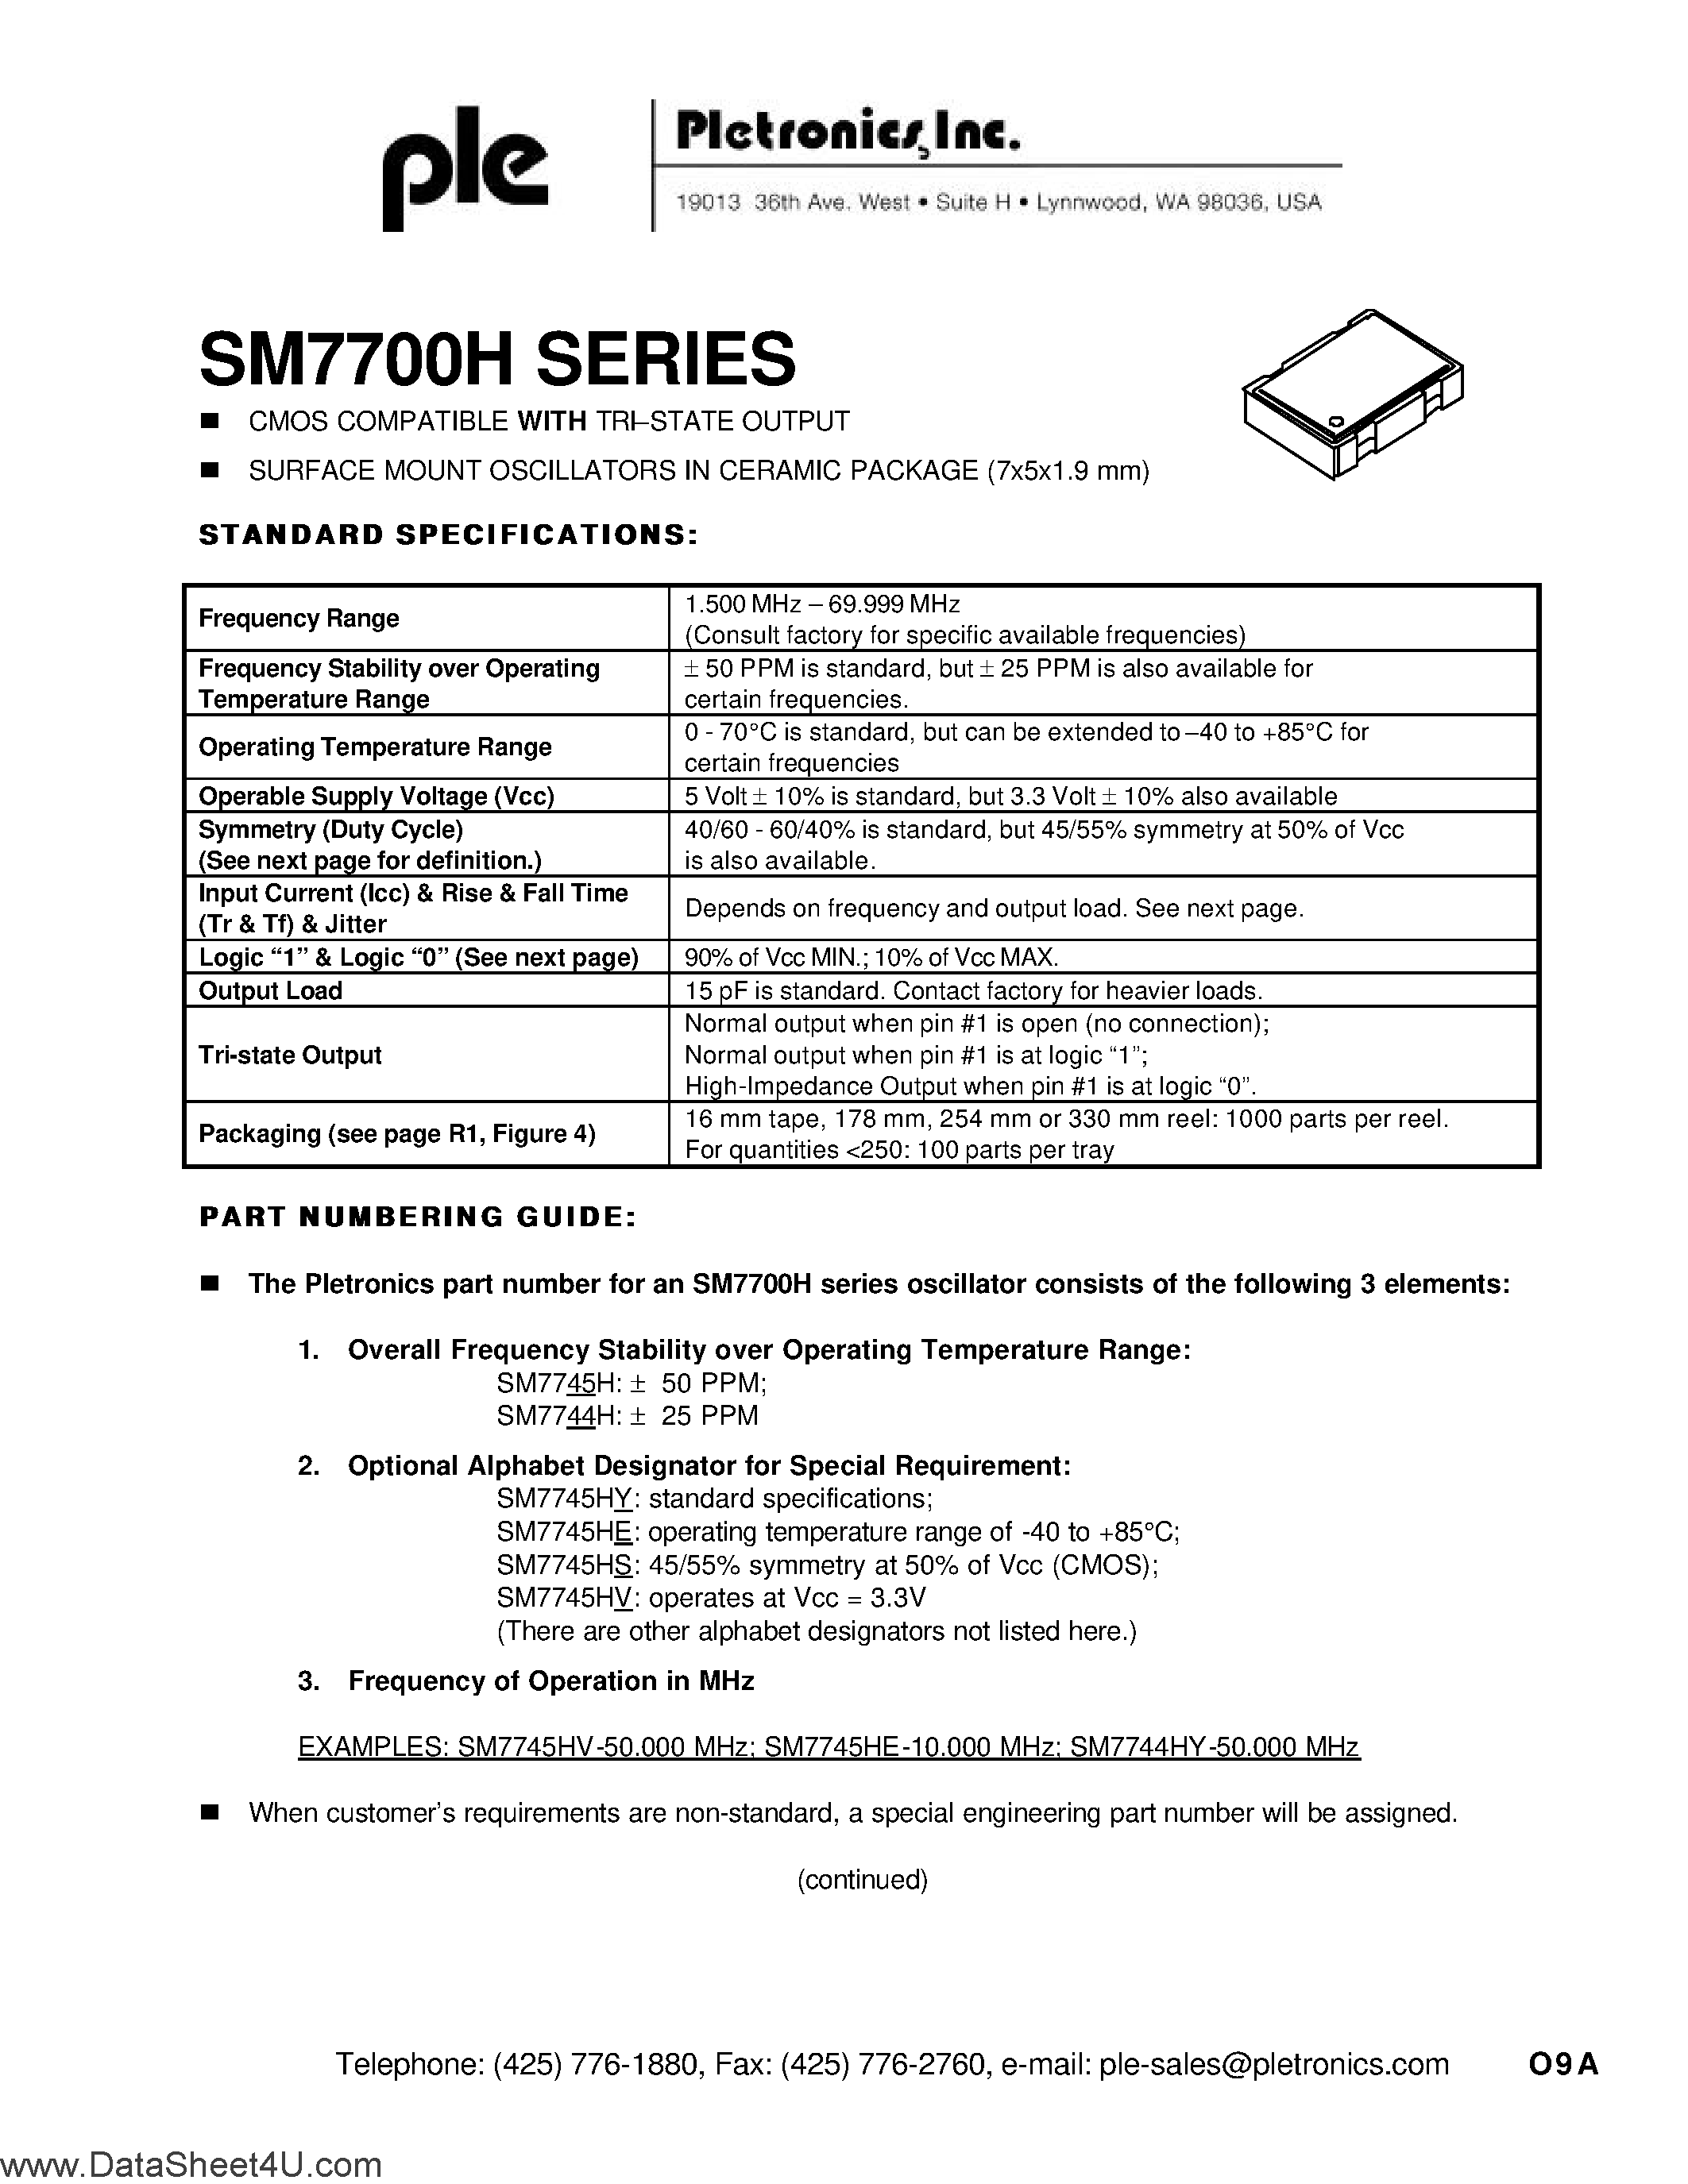 Даташит SM7744H - (SM7700H Series) CMOS COMPATIBLE WITH TRI-STATE OUTPUT страница 1